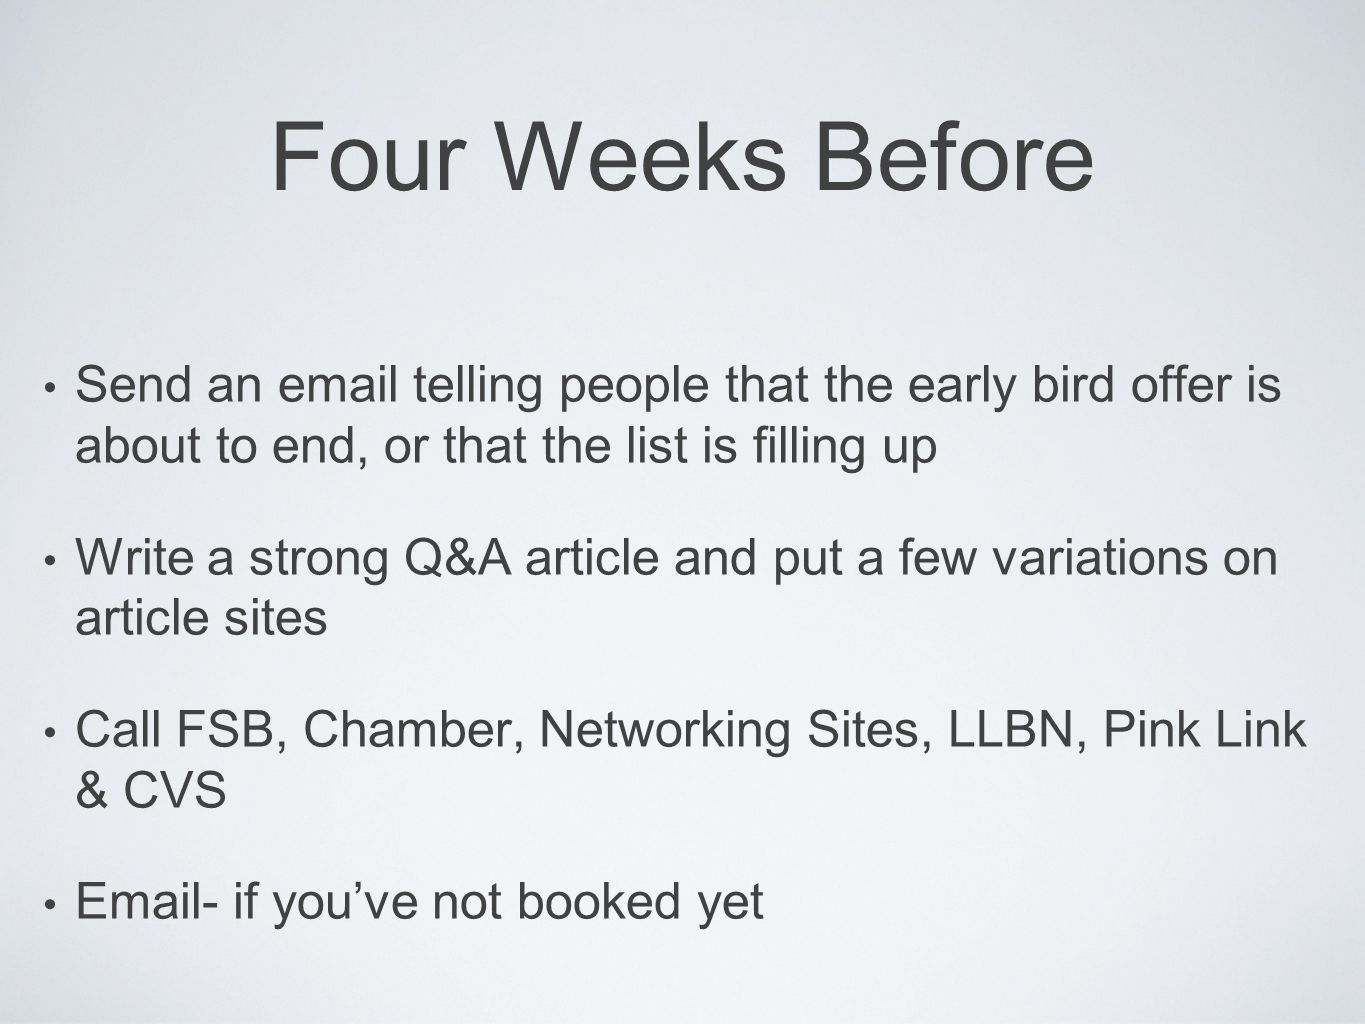 Four Weeks Before Send an  telling people that the early bird offer is about to end, or that the list is filling up Write a strong Q&A article and put a few variations on article sites Call FSB, Chamber, Networking Sites, LLBN, Pink Link & CVS  - if you’ve not booked yet